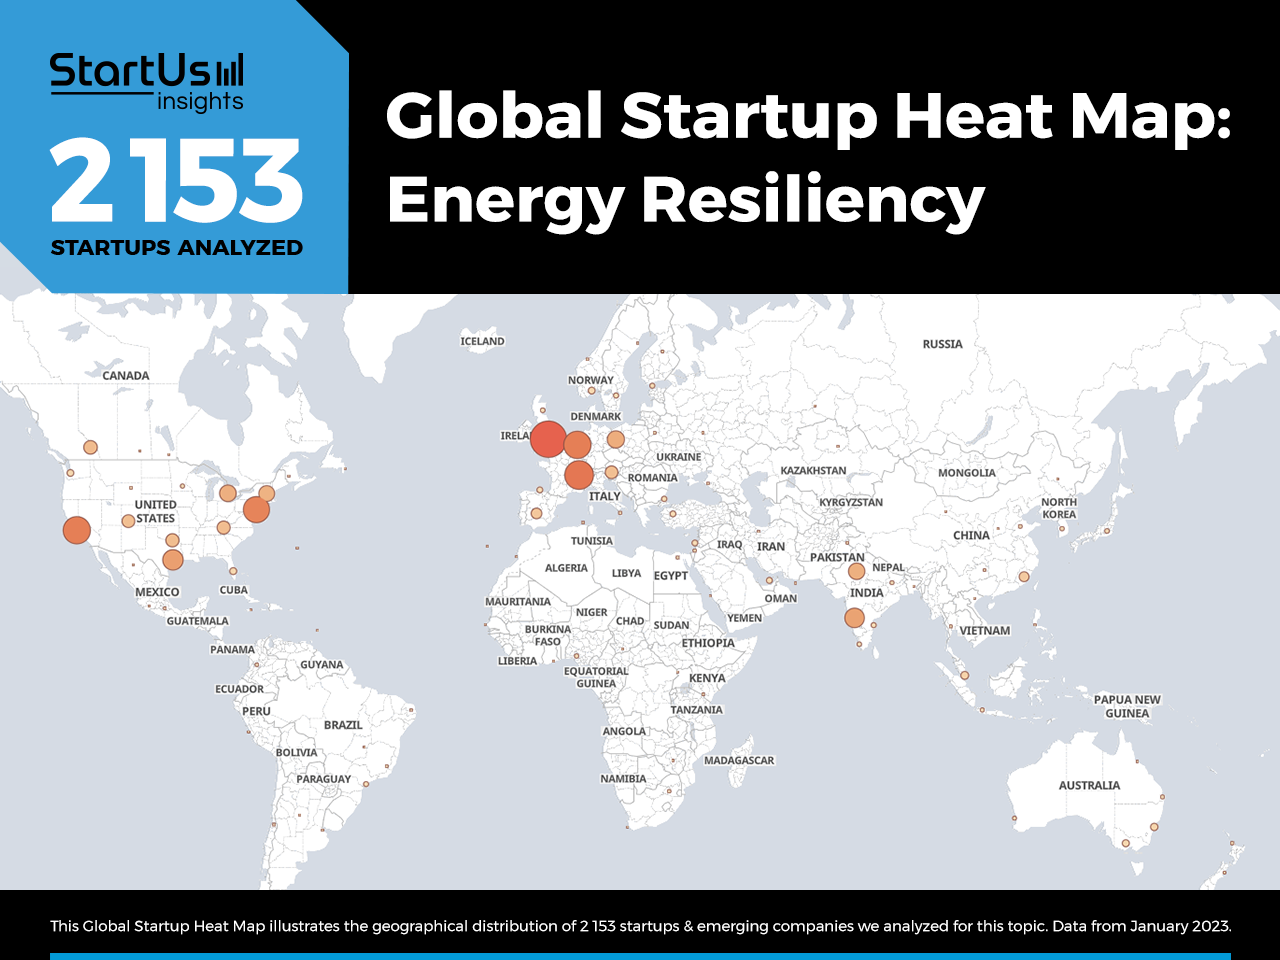 Energy-Resilience-Heat-Map-StartUs-Insights-noresize